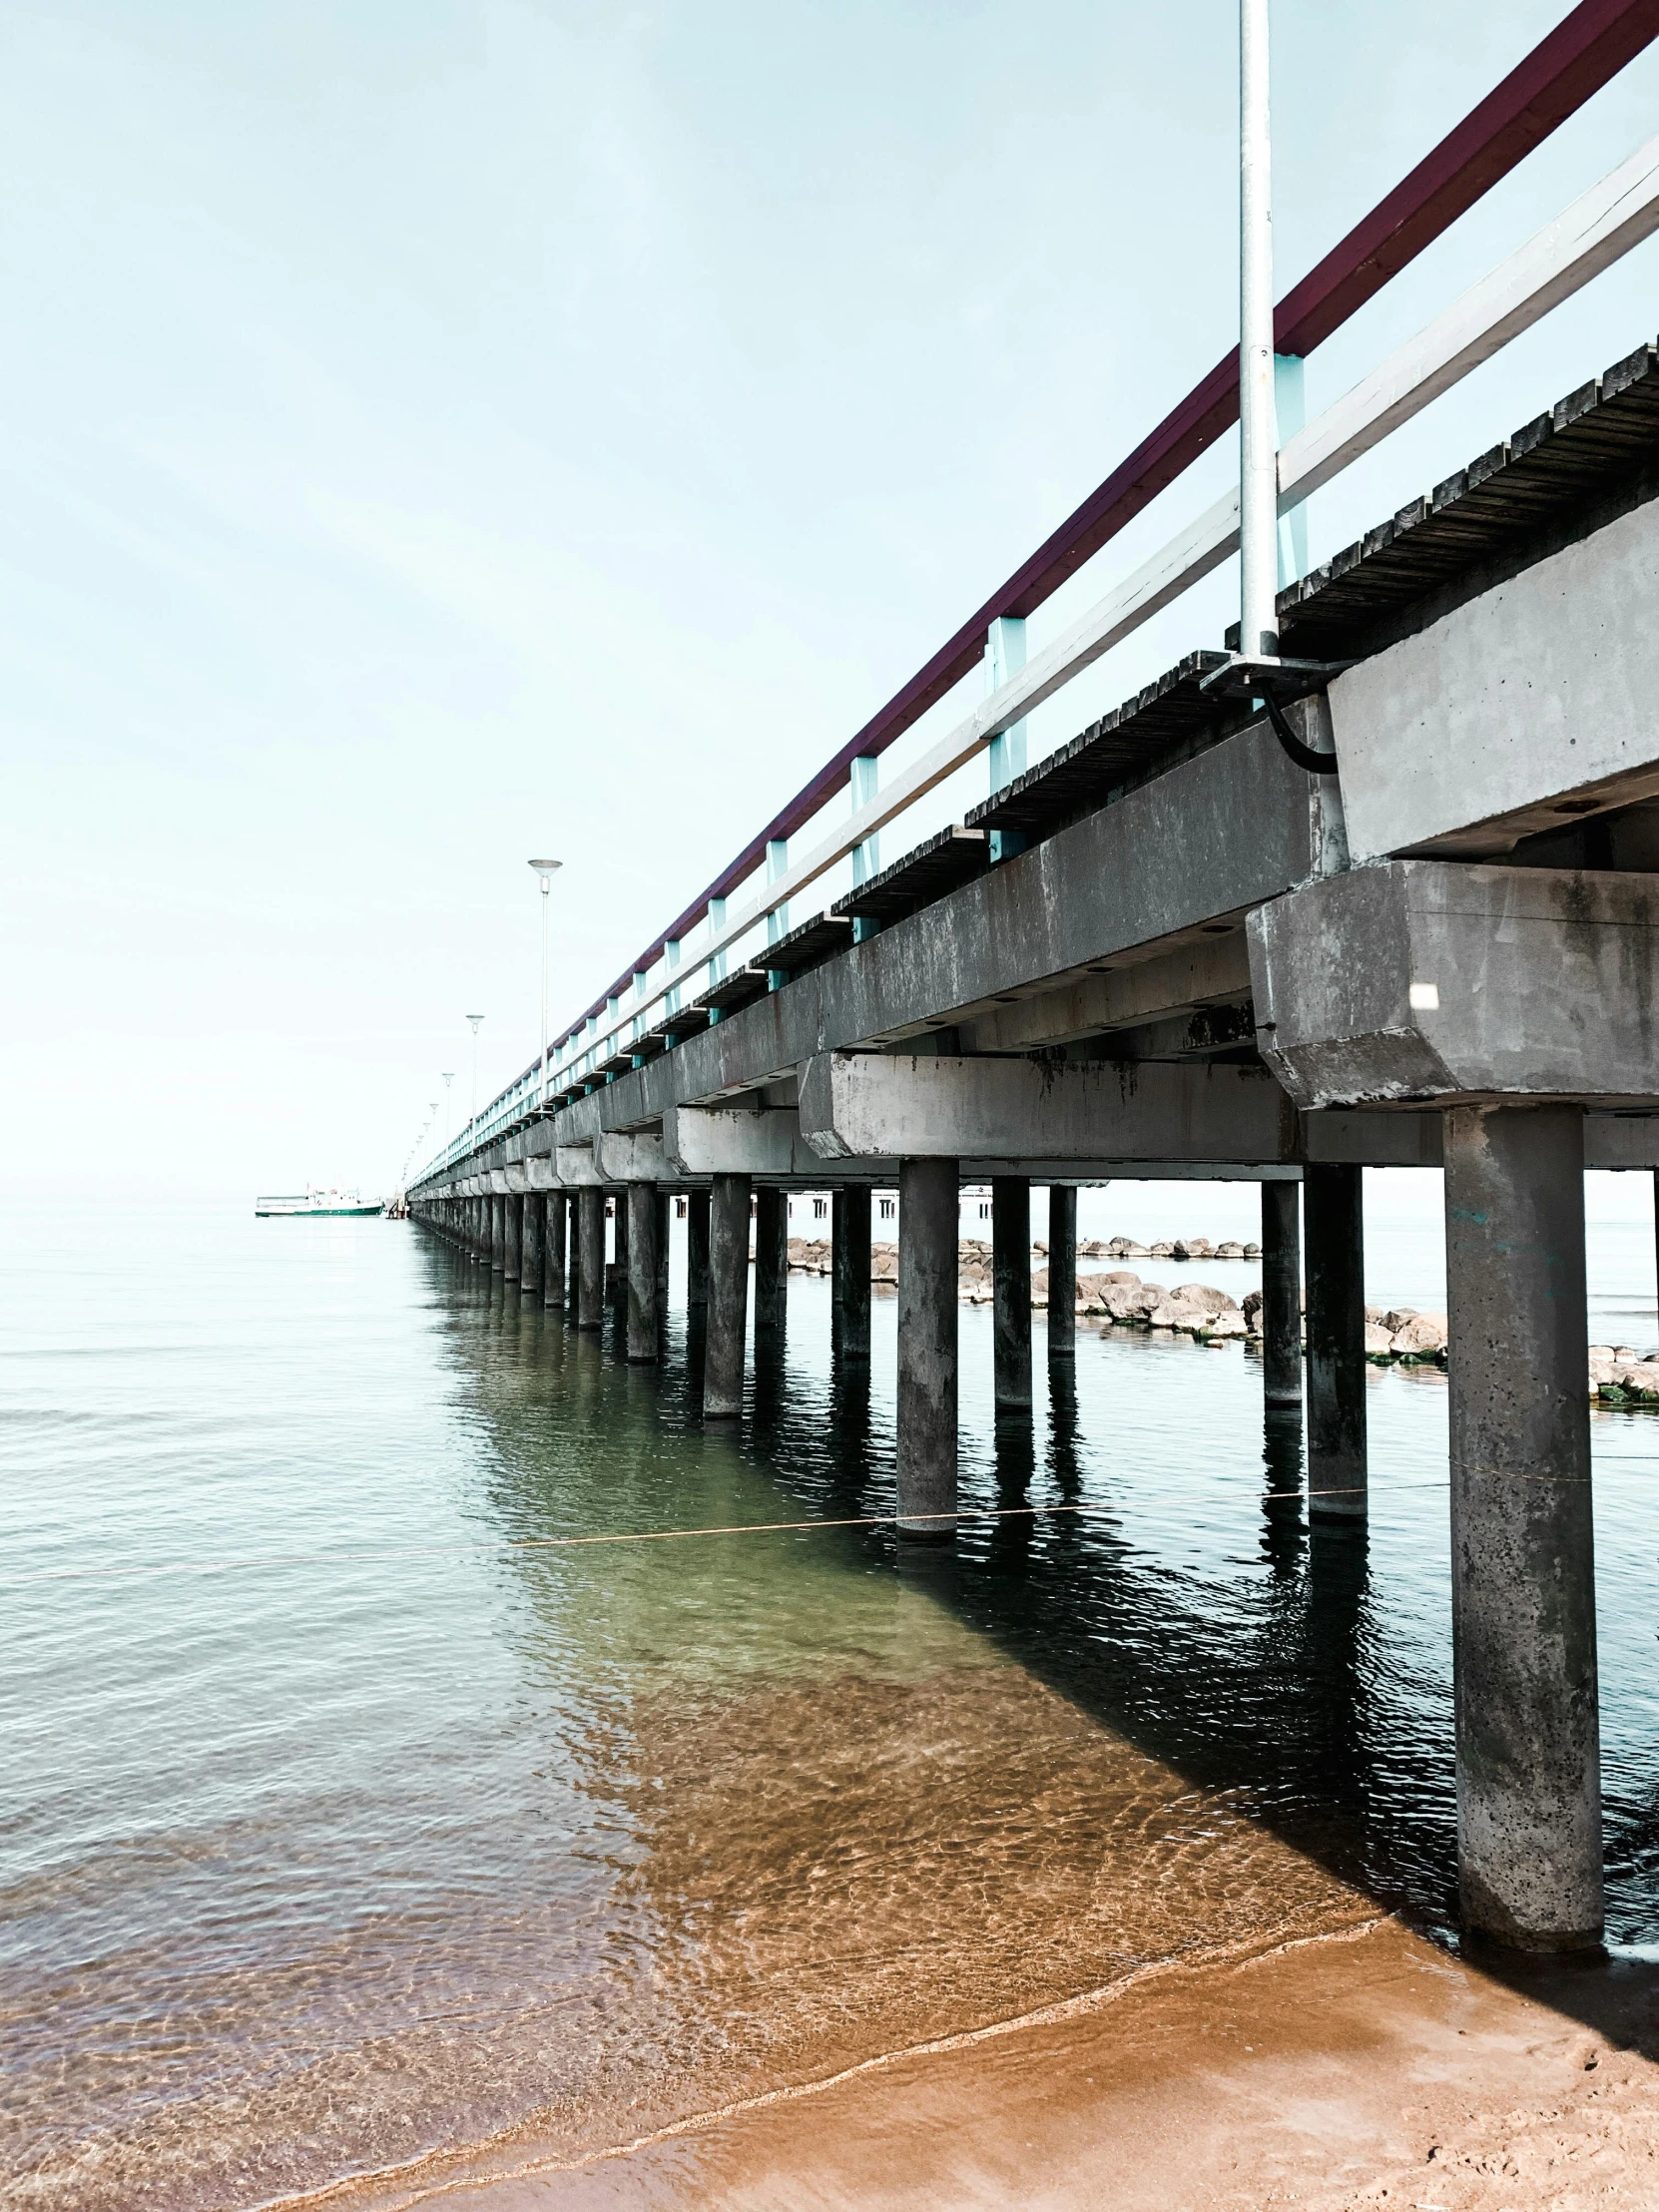 a long bridge over a body of water, unsplash, hyperrealism, capital of estonia, 2022 photograph, seaside, viewed from below